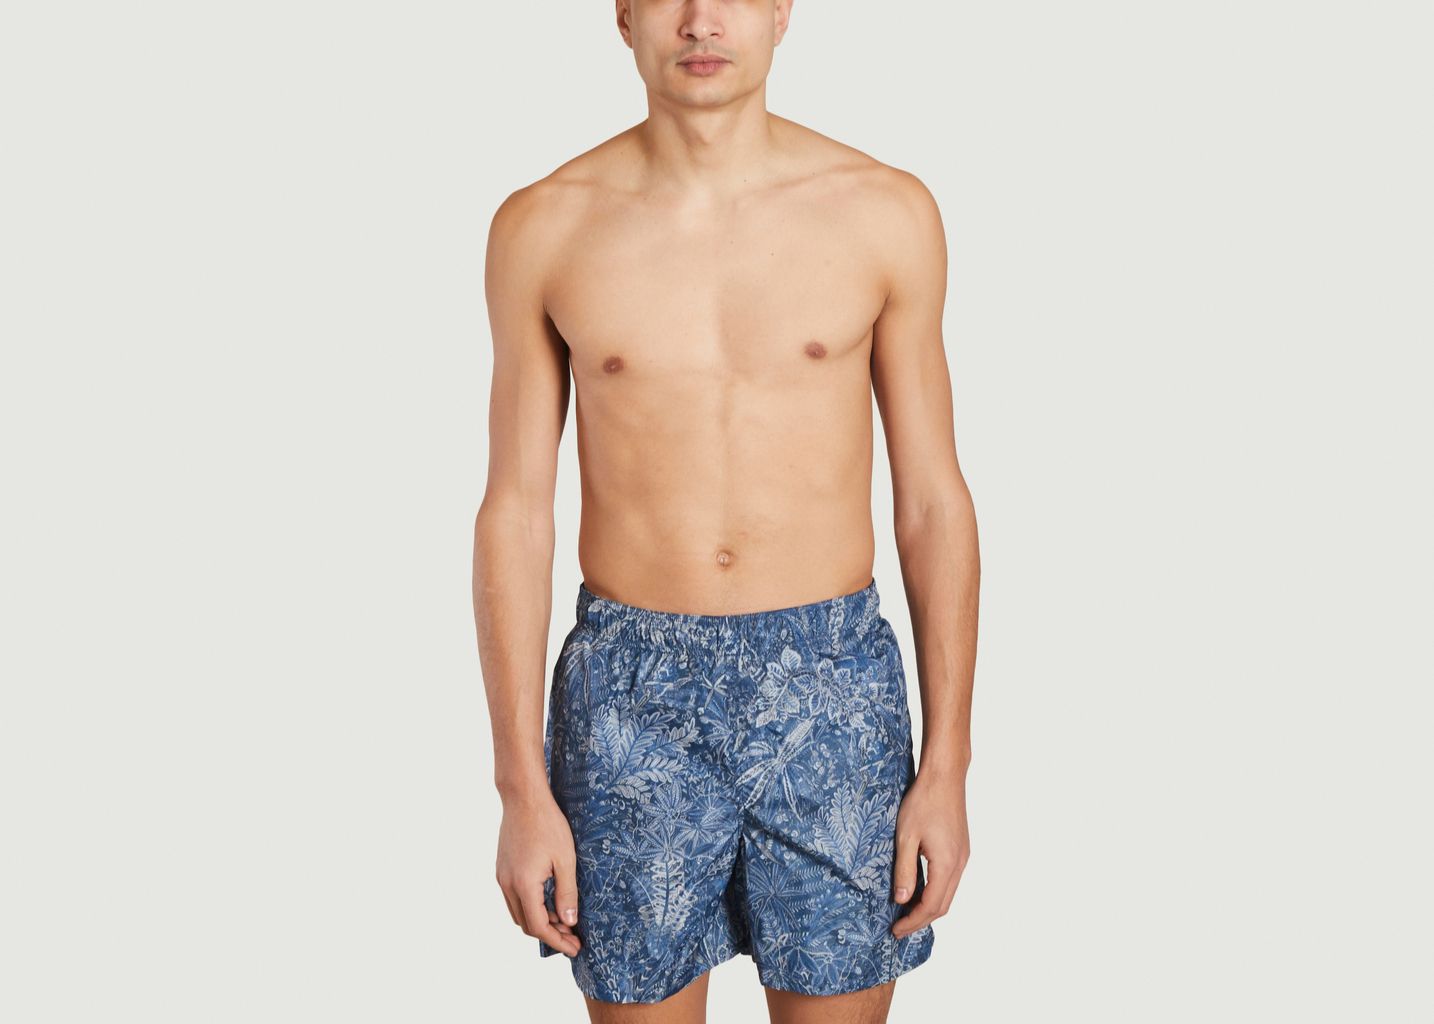 Forrest shorts - A.P.C.